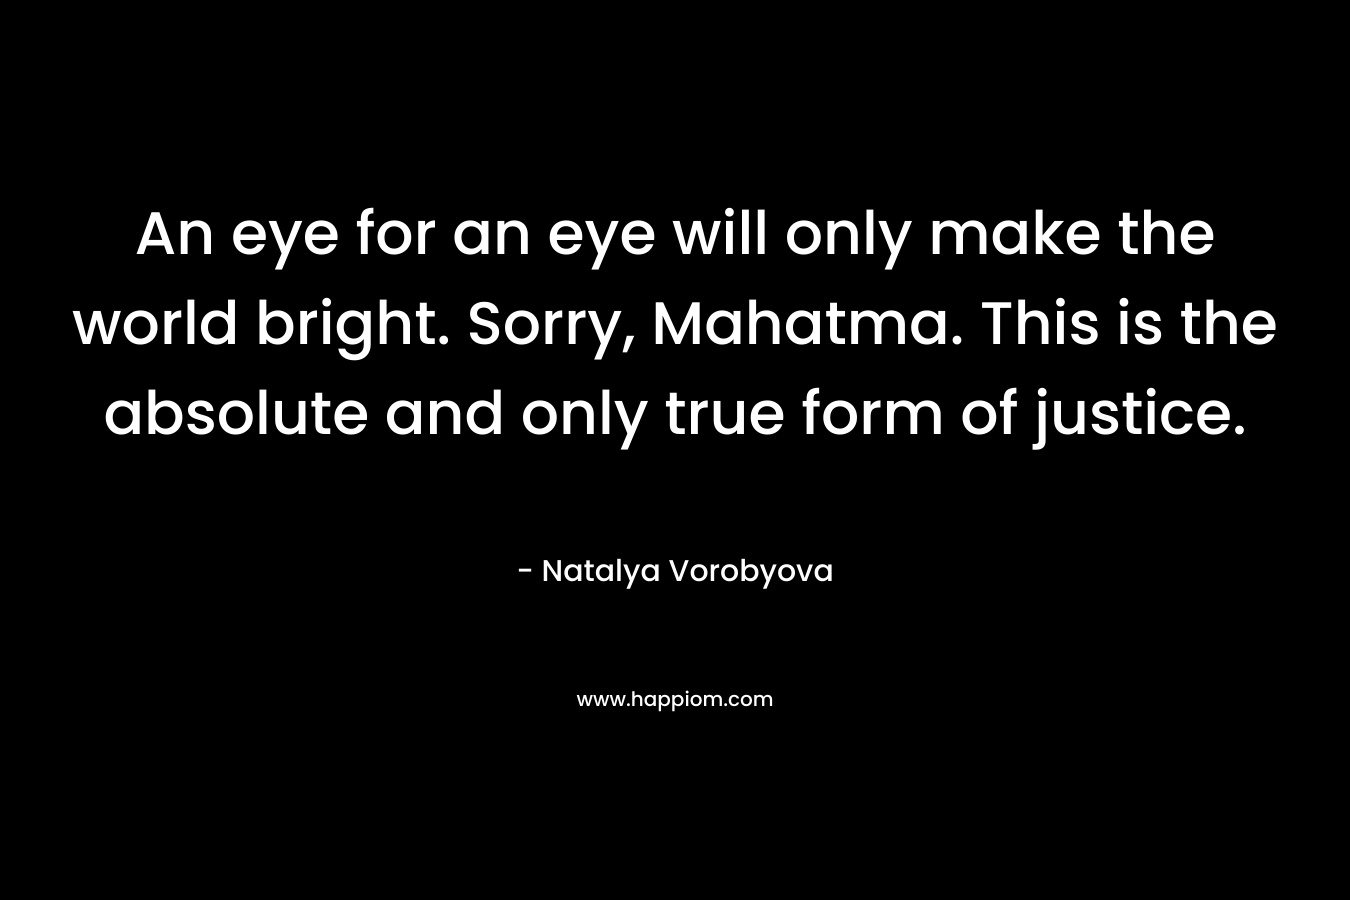 An eye for an eye will only make the world bright. Sorry, Mahatma. This is the absolute and only true form of justice.